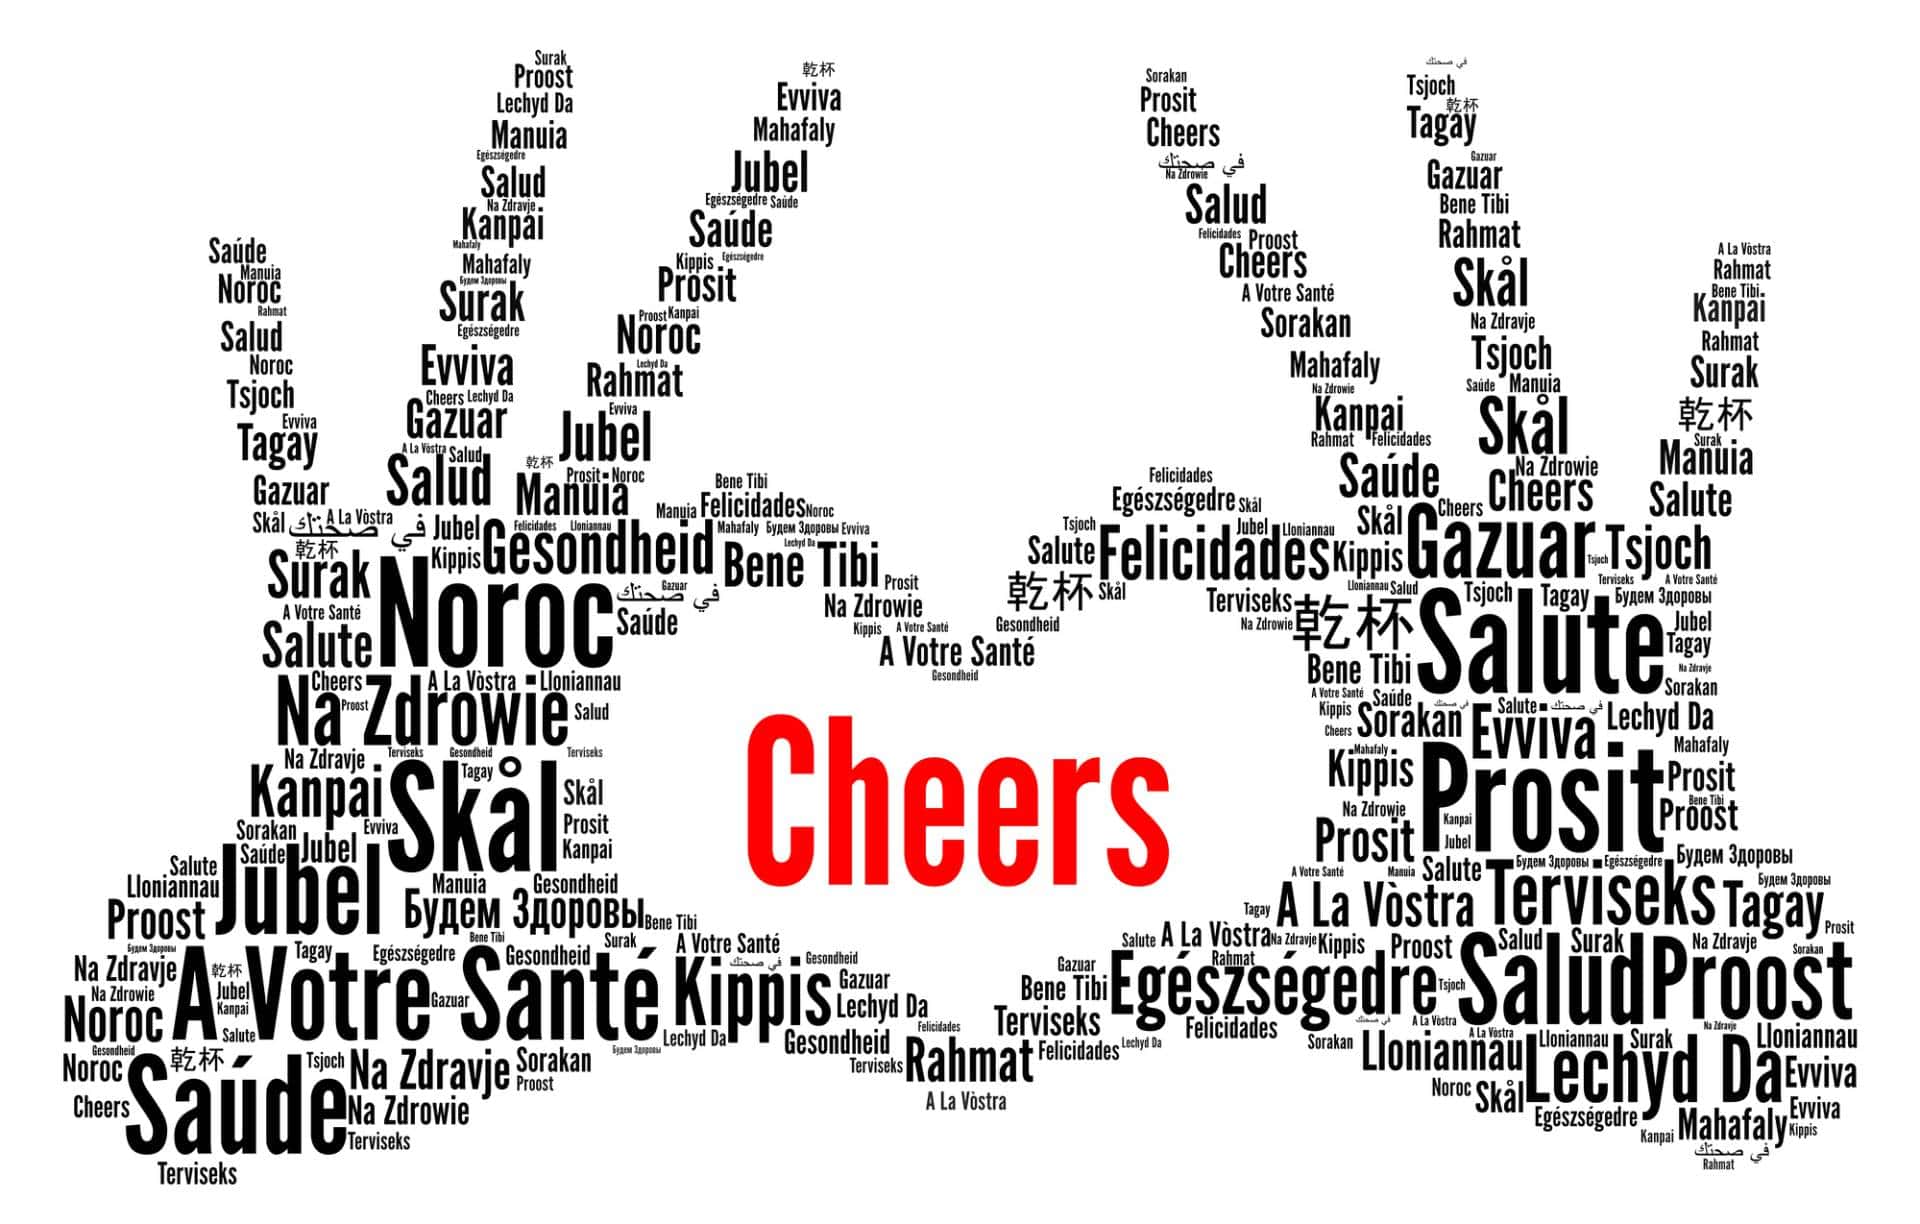 How do I say cheers in the various European languages?